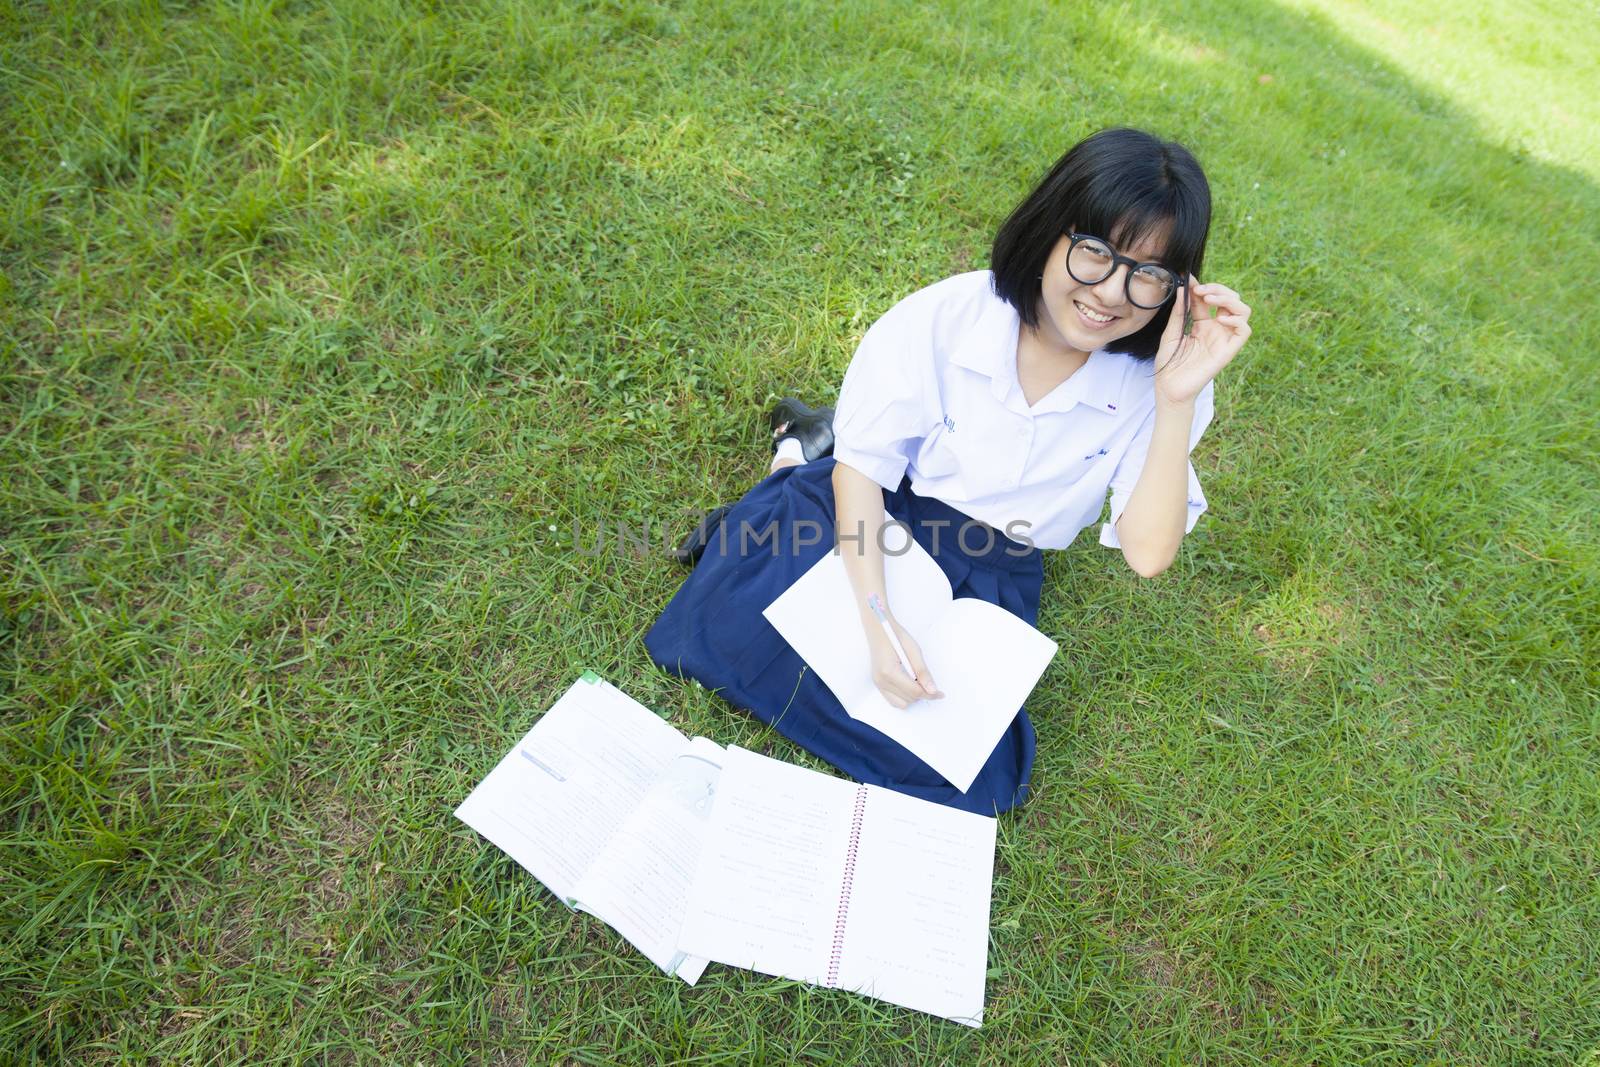 Girl reading on the lawn. Smiling a happy and enjoy. In a shady park